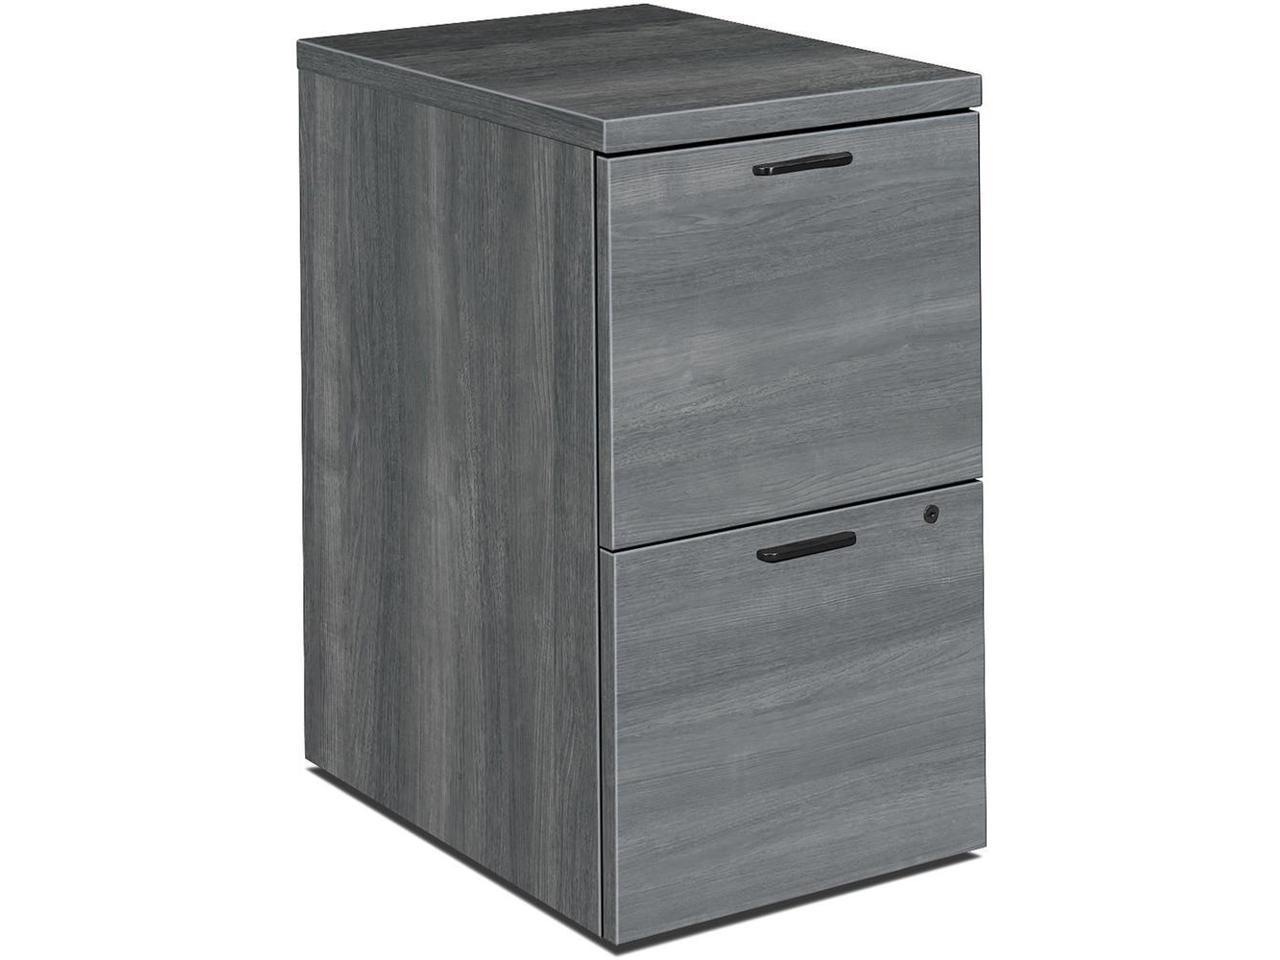 The HON HON105104LS1 15.8 x 22.8 x 28 in. 10500 Series Freestanding File & File Mobile Pedestal - image 2 of 3